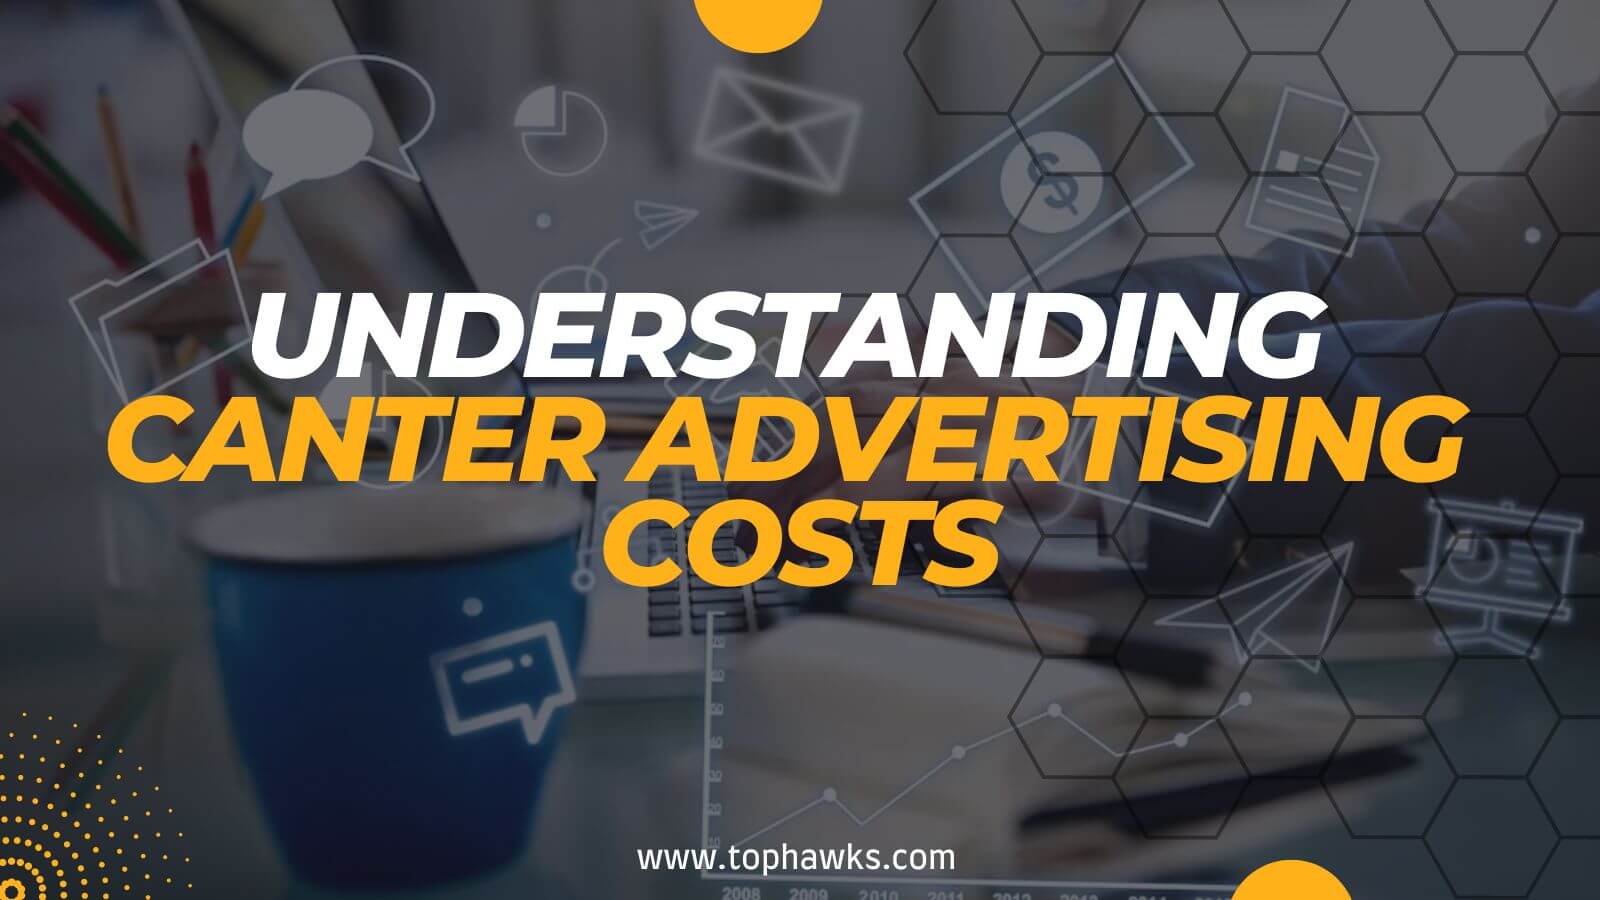 Image depicting Understanding Canter Advertising Costs